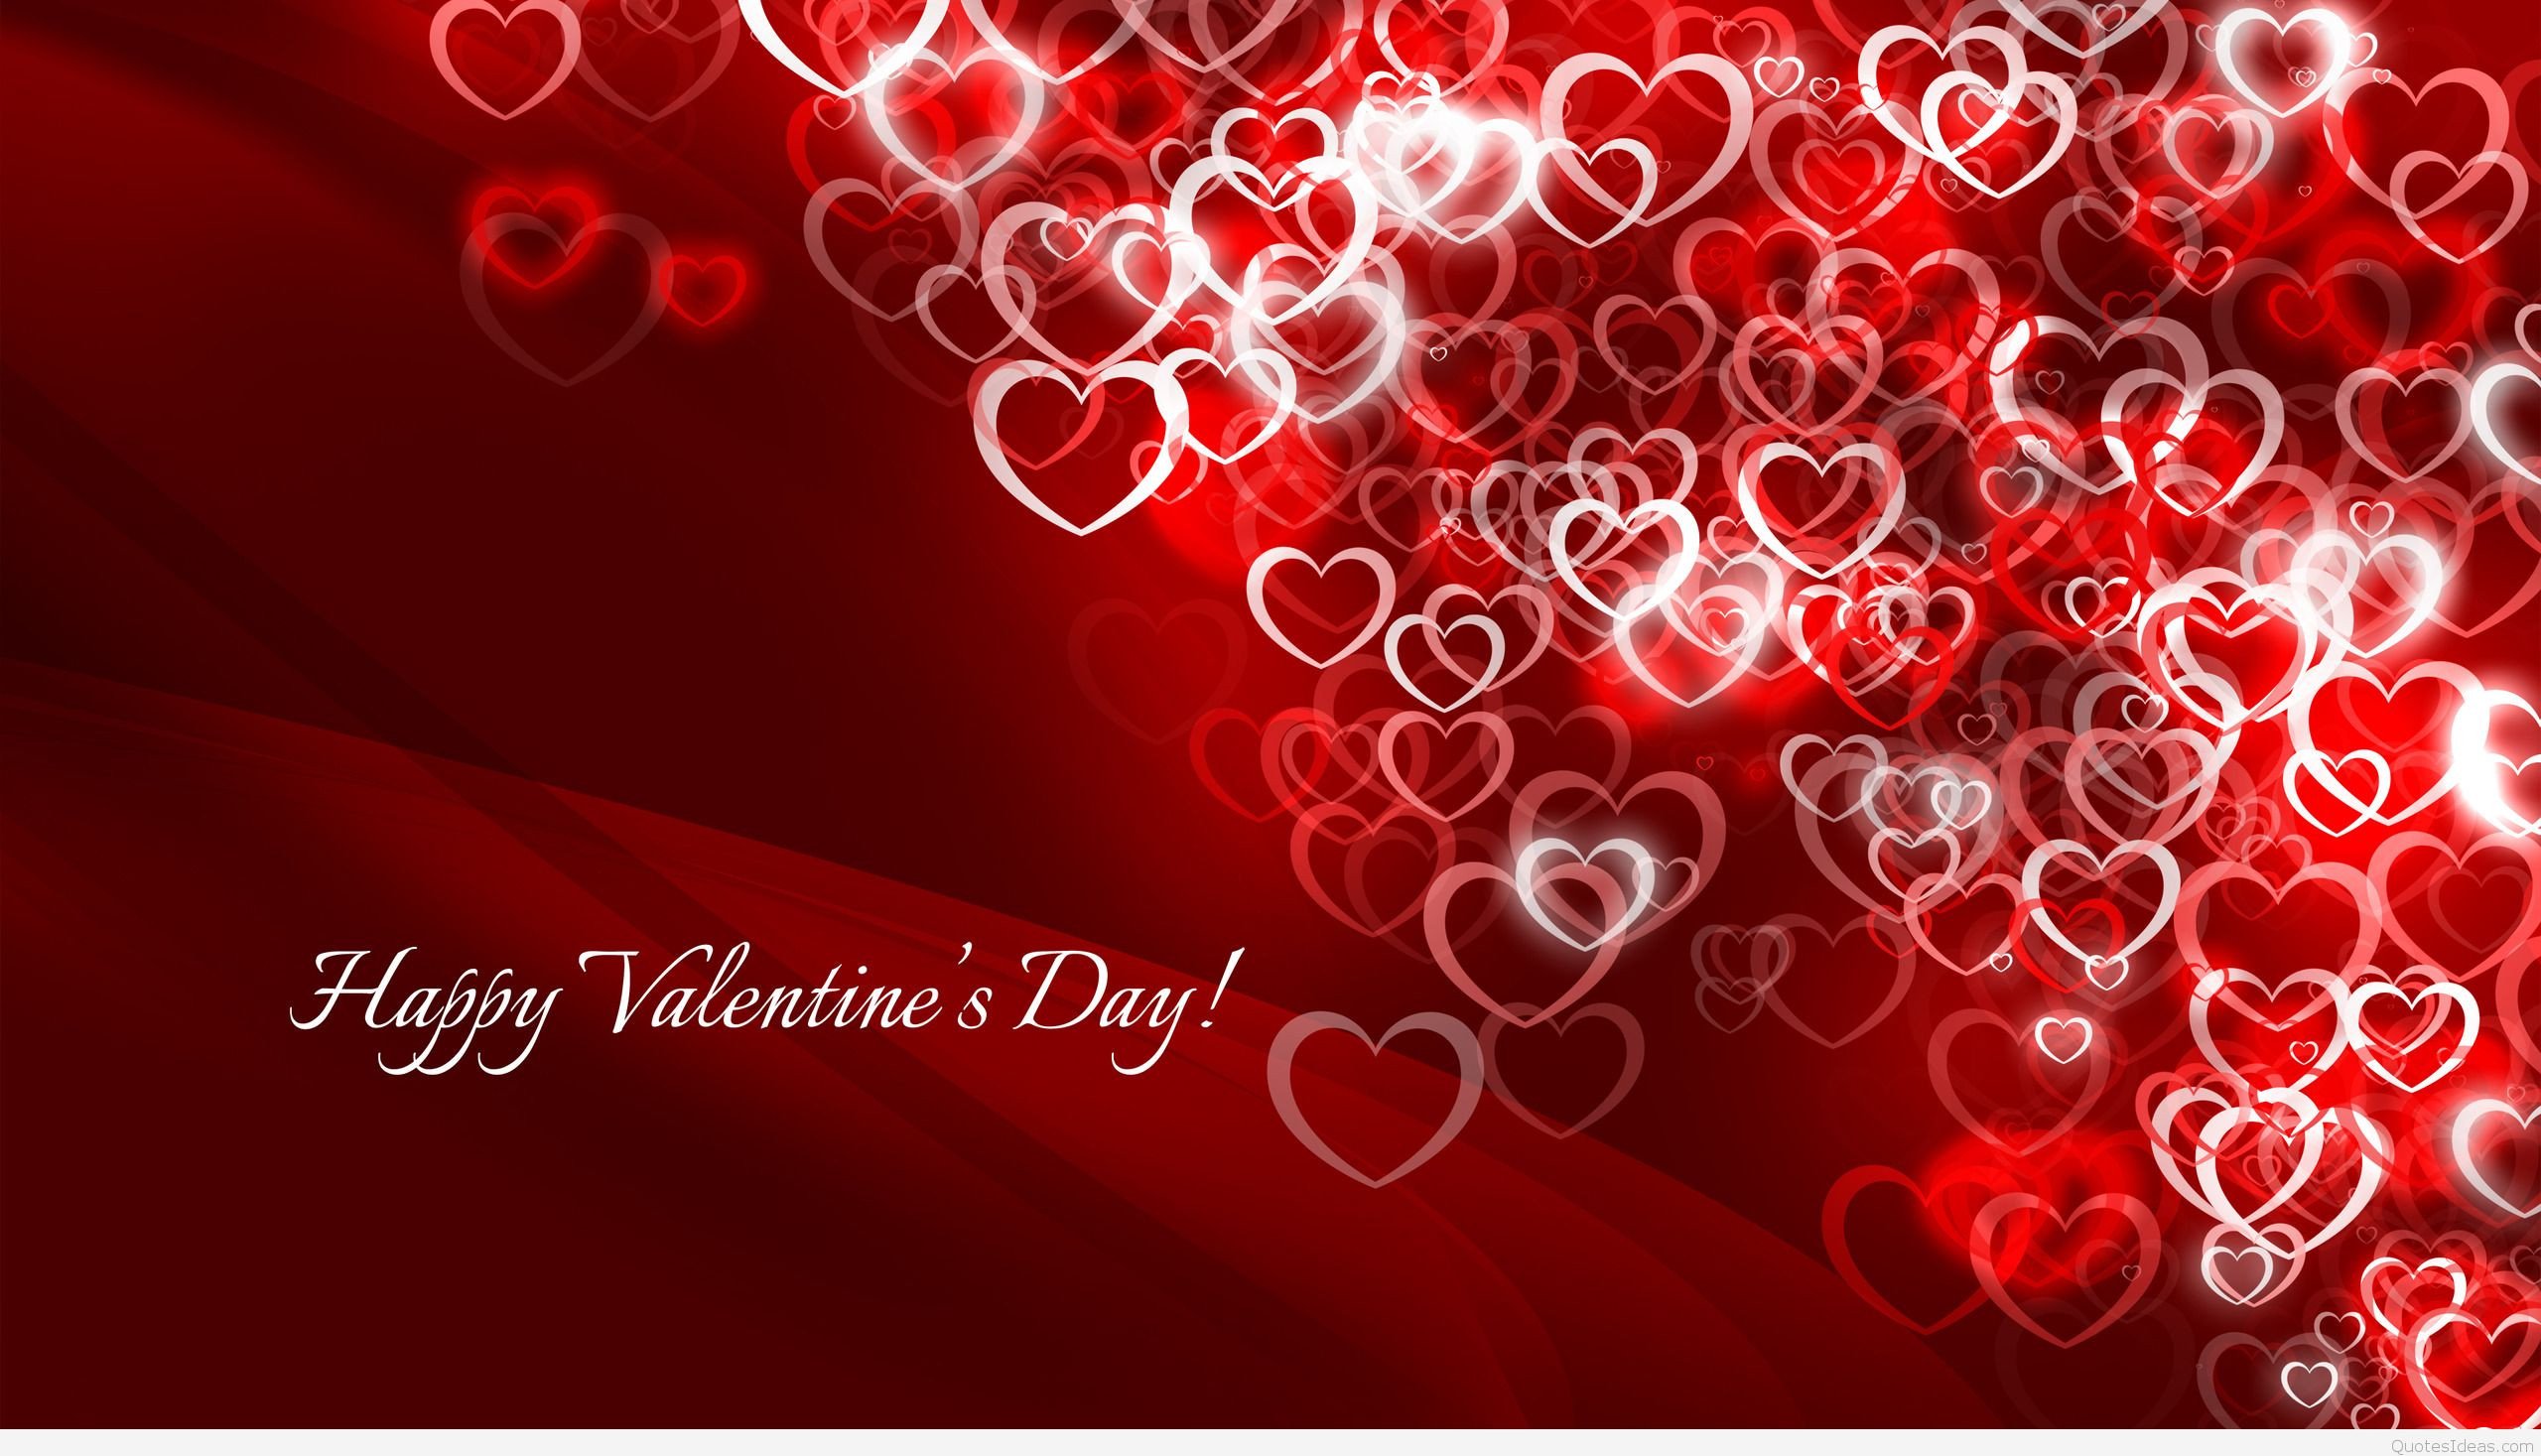 Happy Valentines Day Wallpaper Best Happy Valentine S Day Pics Sayings 2016 2017